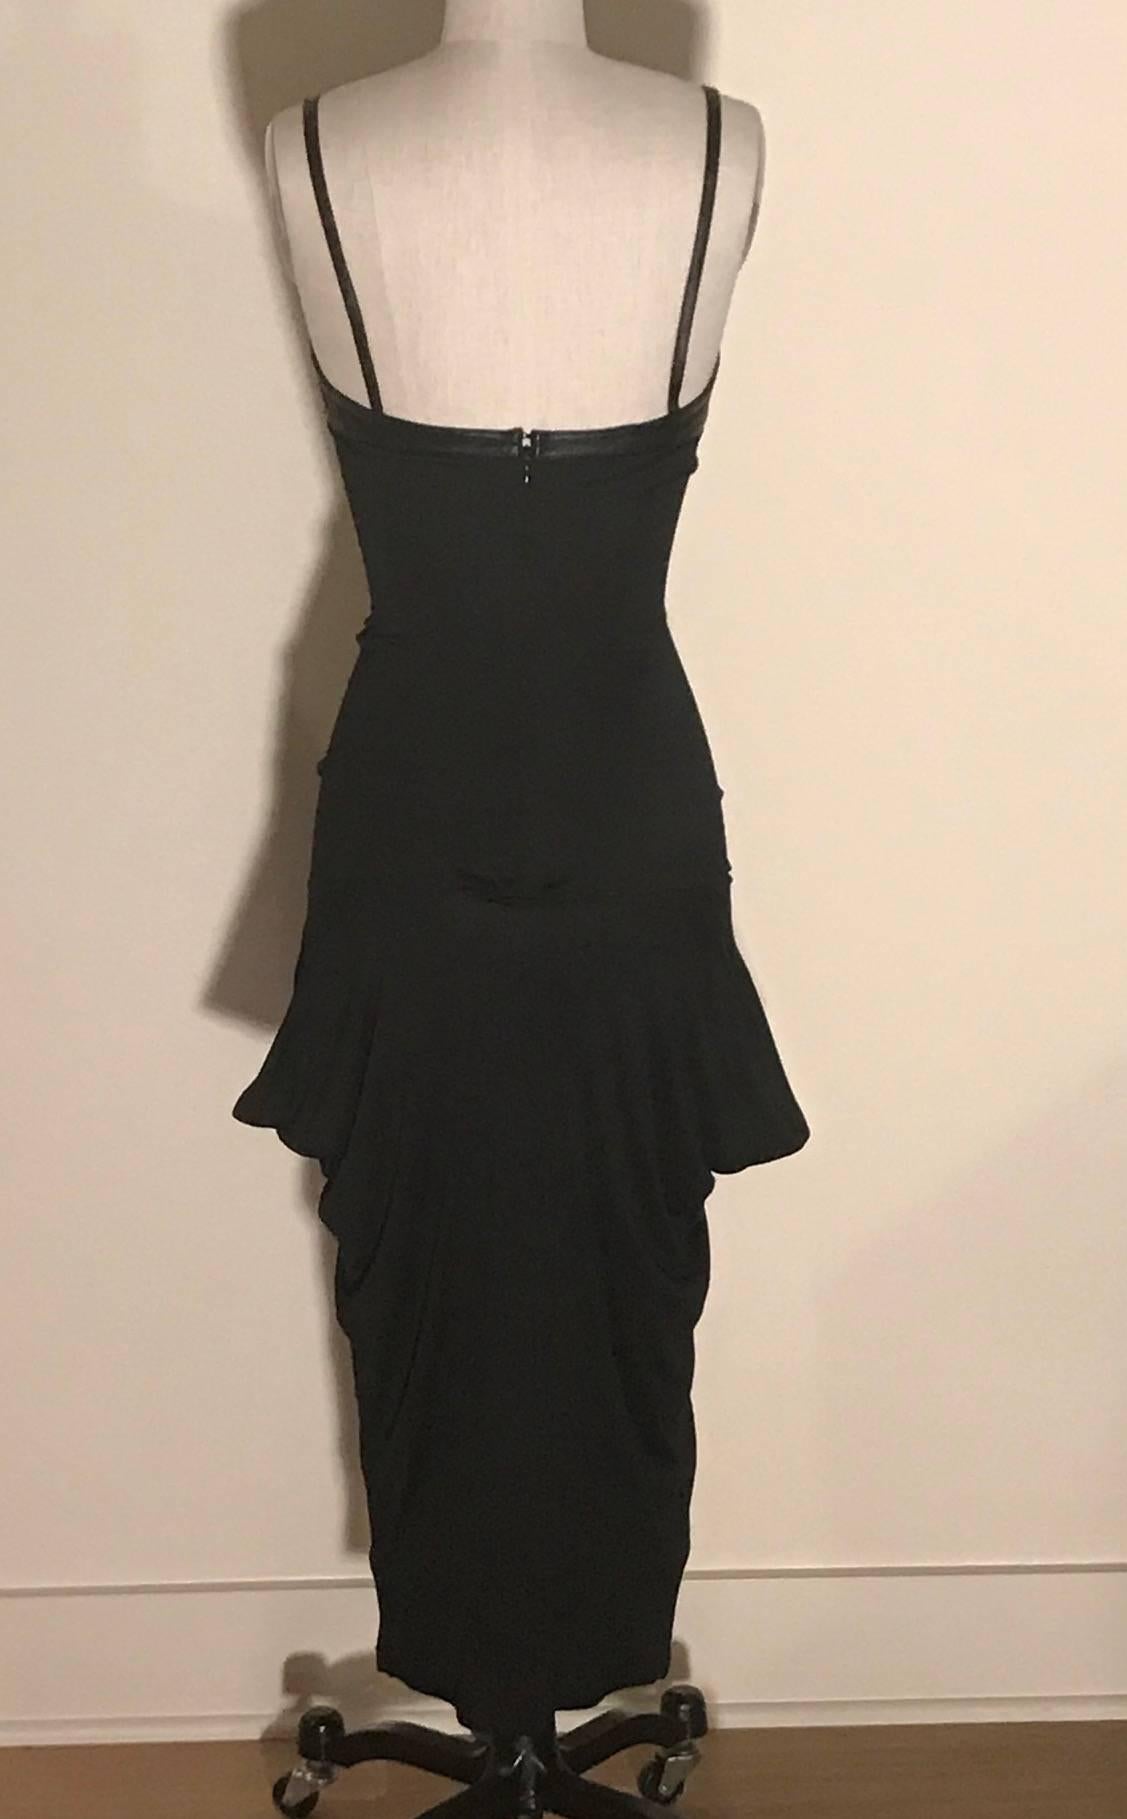 Alexander McQueen black super soft jersey midi length dress with leather detailing at bust. Sculptural draping at sides just below hip. Back zip and hook and eye. 

80% viscose, 20% silk, with leather detail.

Size IT 40, approximate US 2/4. See